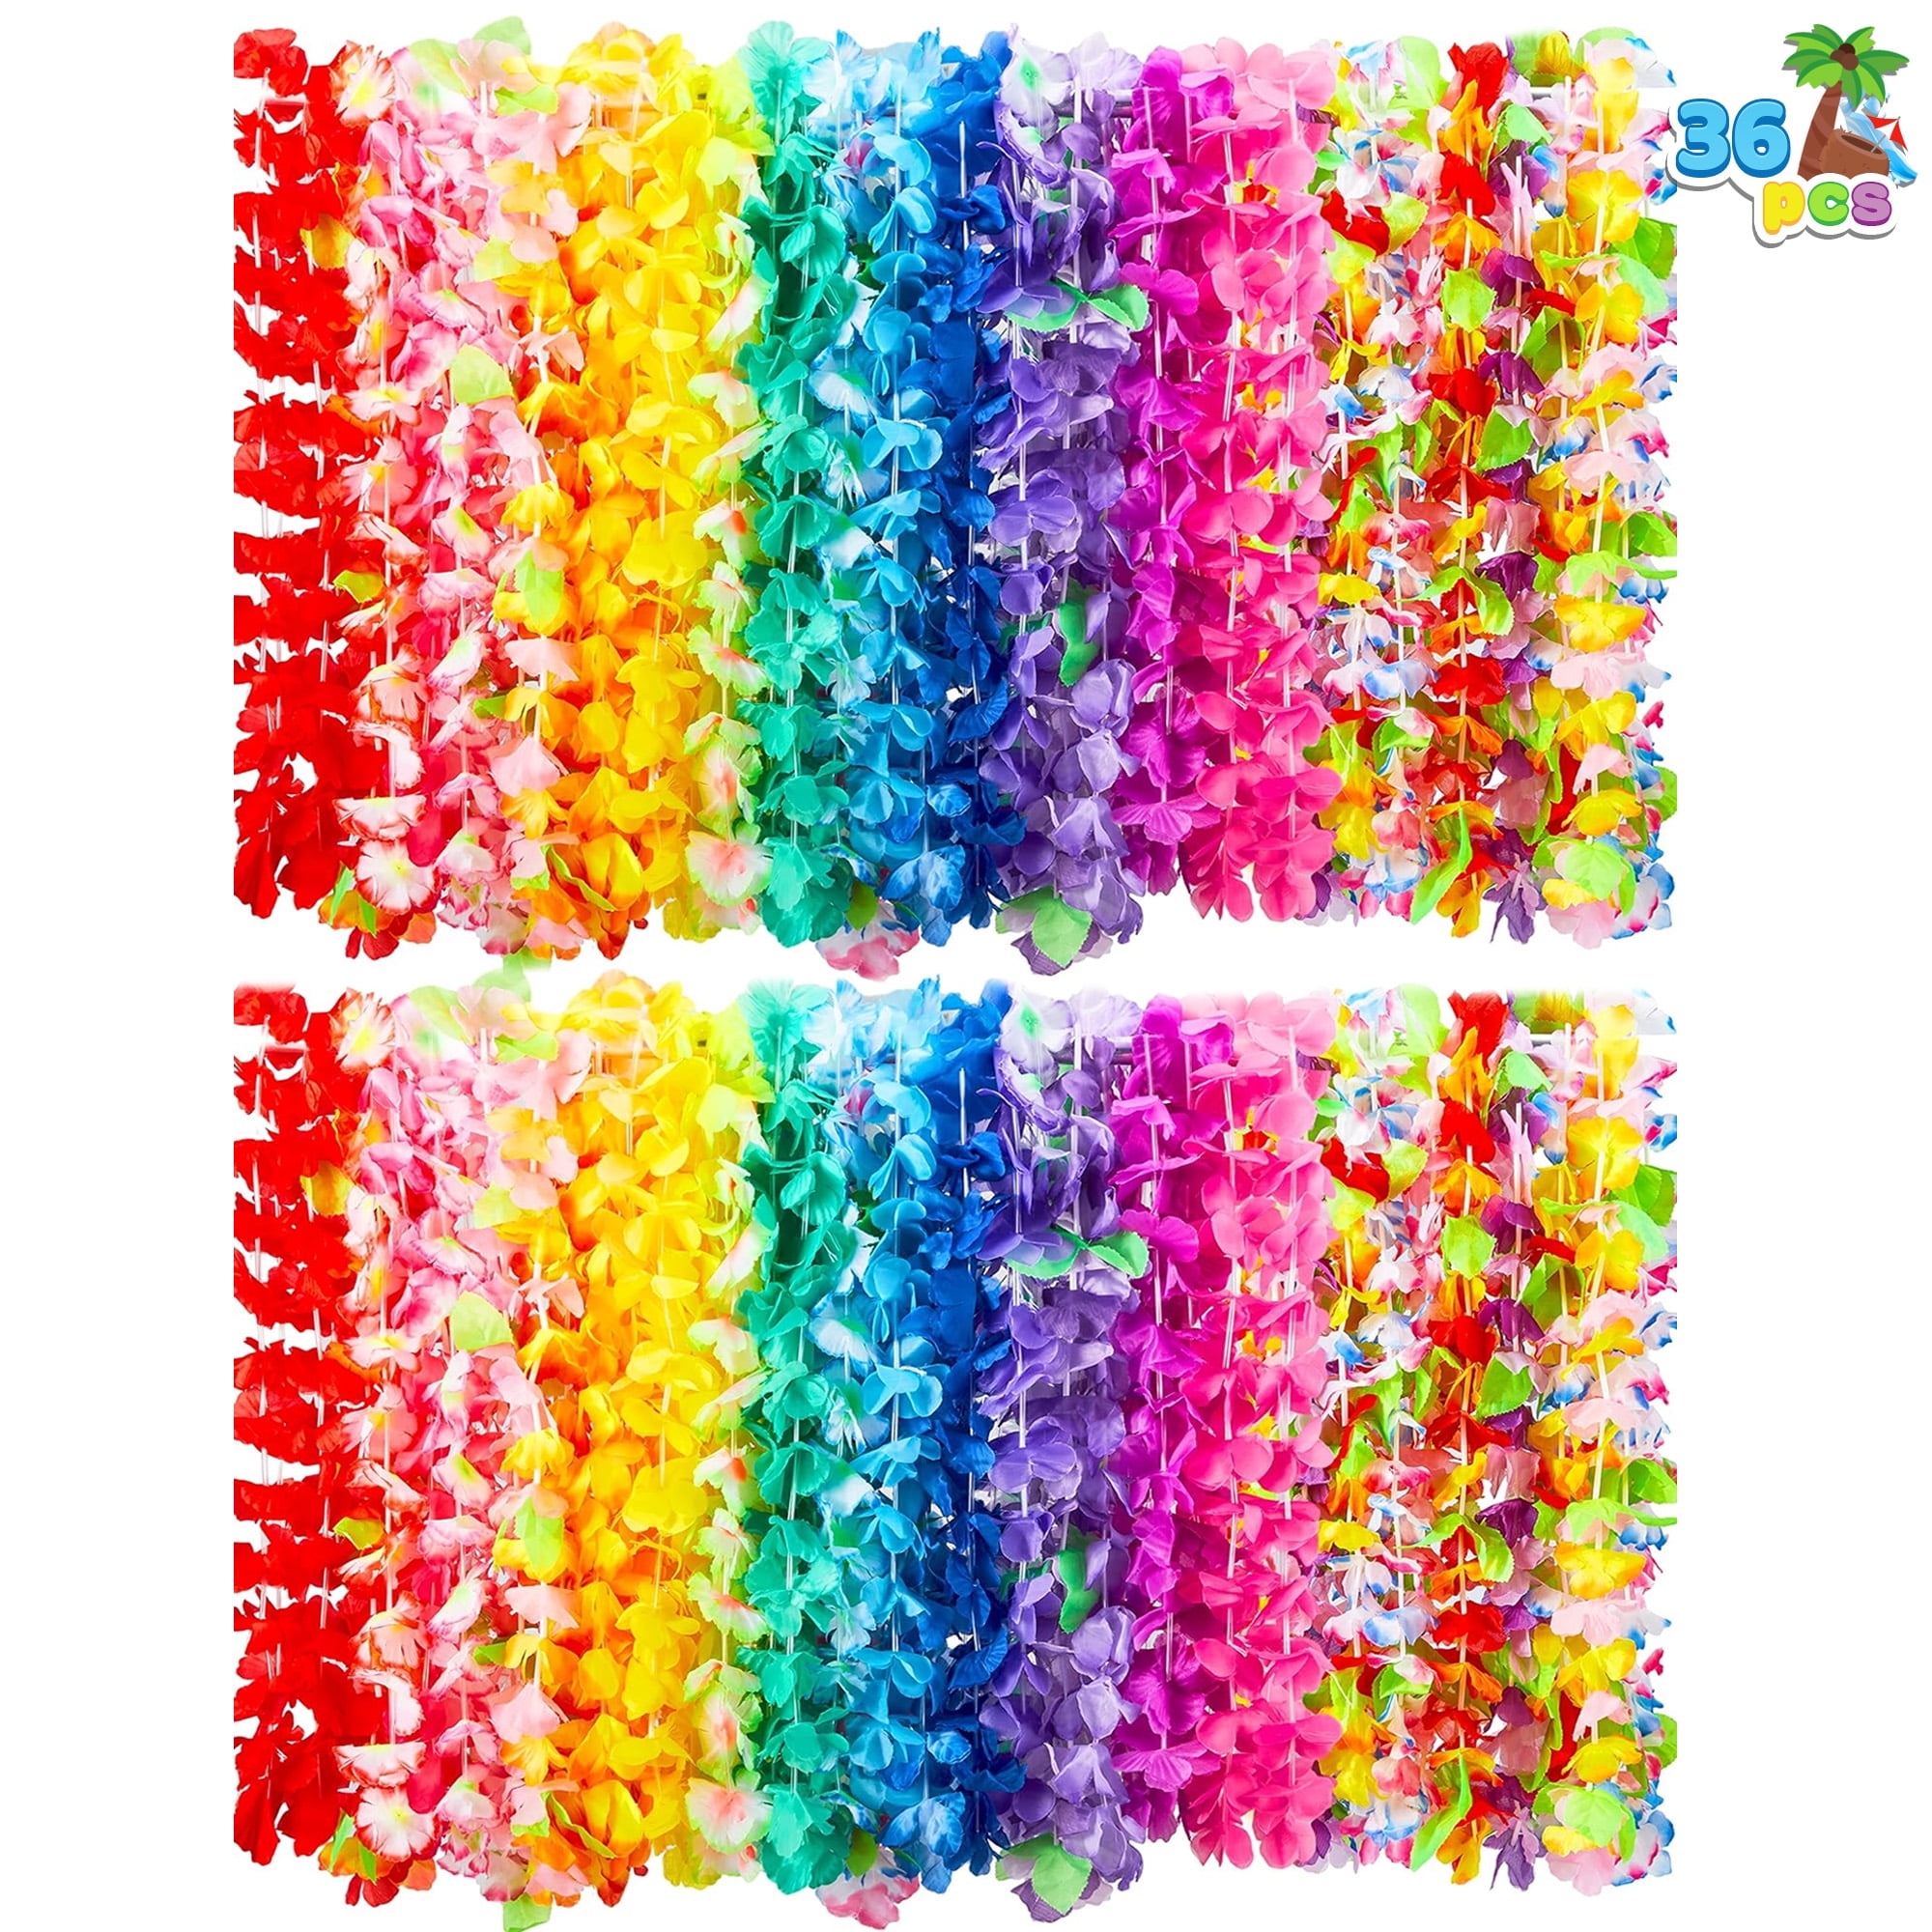 Syncfun 36 Pcs Hawaiian Leis Bulk, Flower Leis Luau Party Decorations Wedding Favors Holiday Silly String Beach Birthday Party Supplies - image 1 of 8